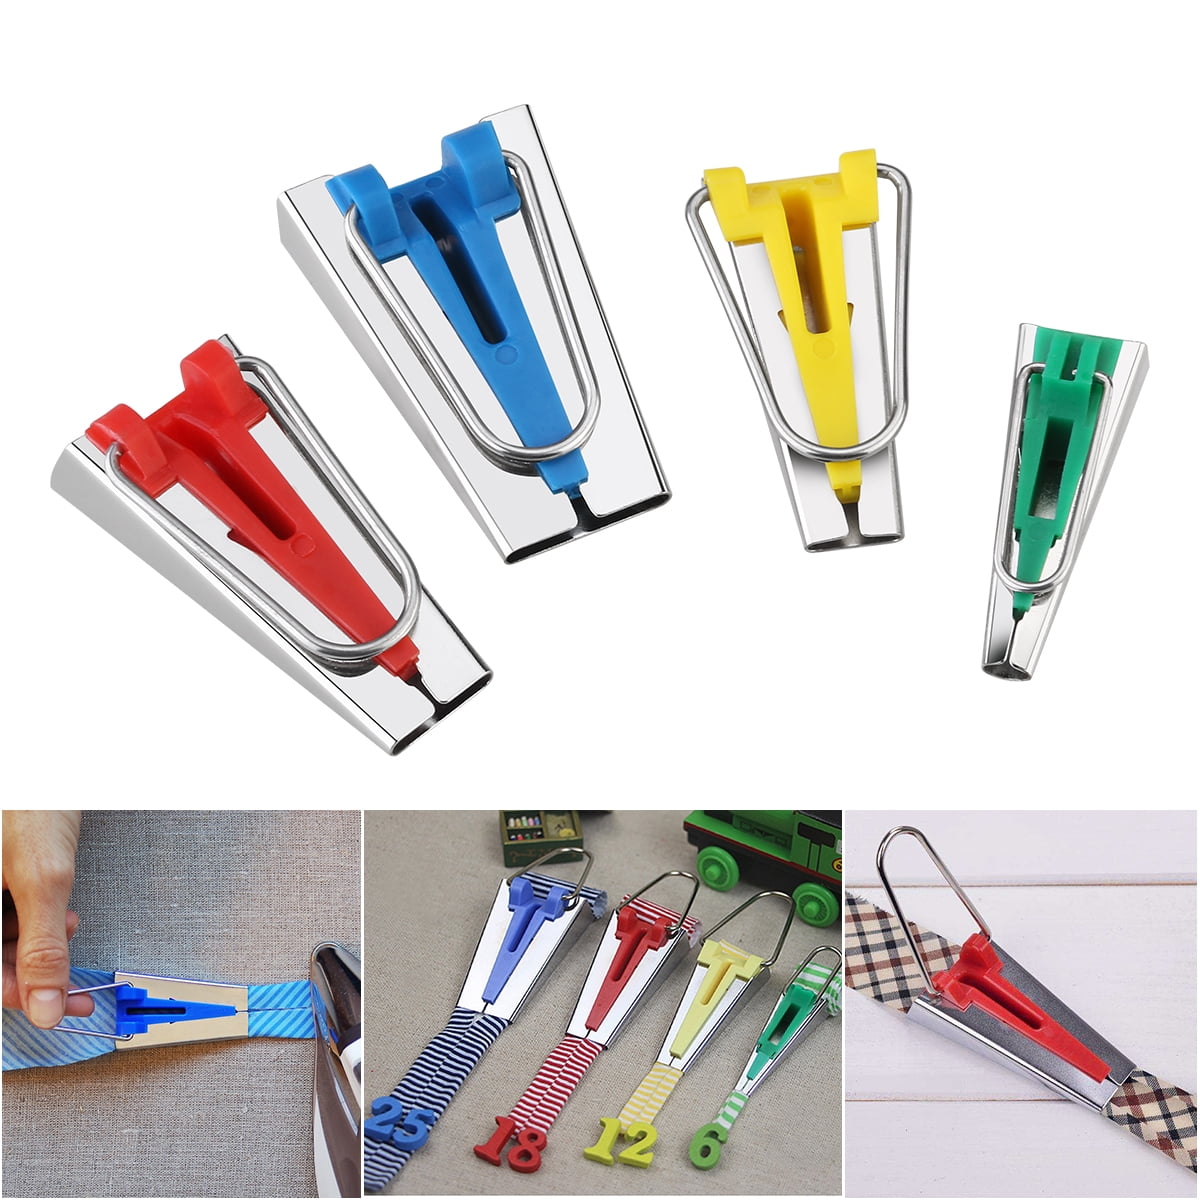 Sewing Fabric Bias Tape Maker Tool Kit 6MM 12MM 18MM 25MM with 4 Pcs Cloth Clips Sewing Craft Scissor & Soft Tape Measure Tool for Quilt Binding Bias Tape Maker Set Awl 